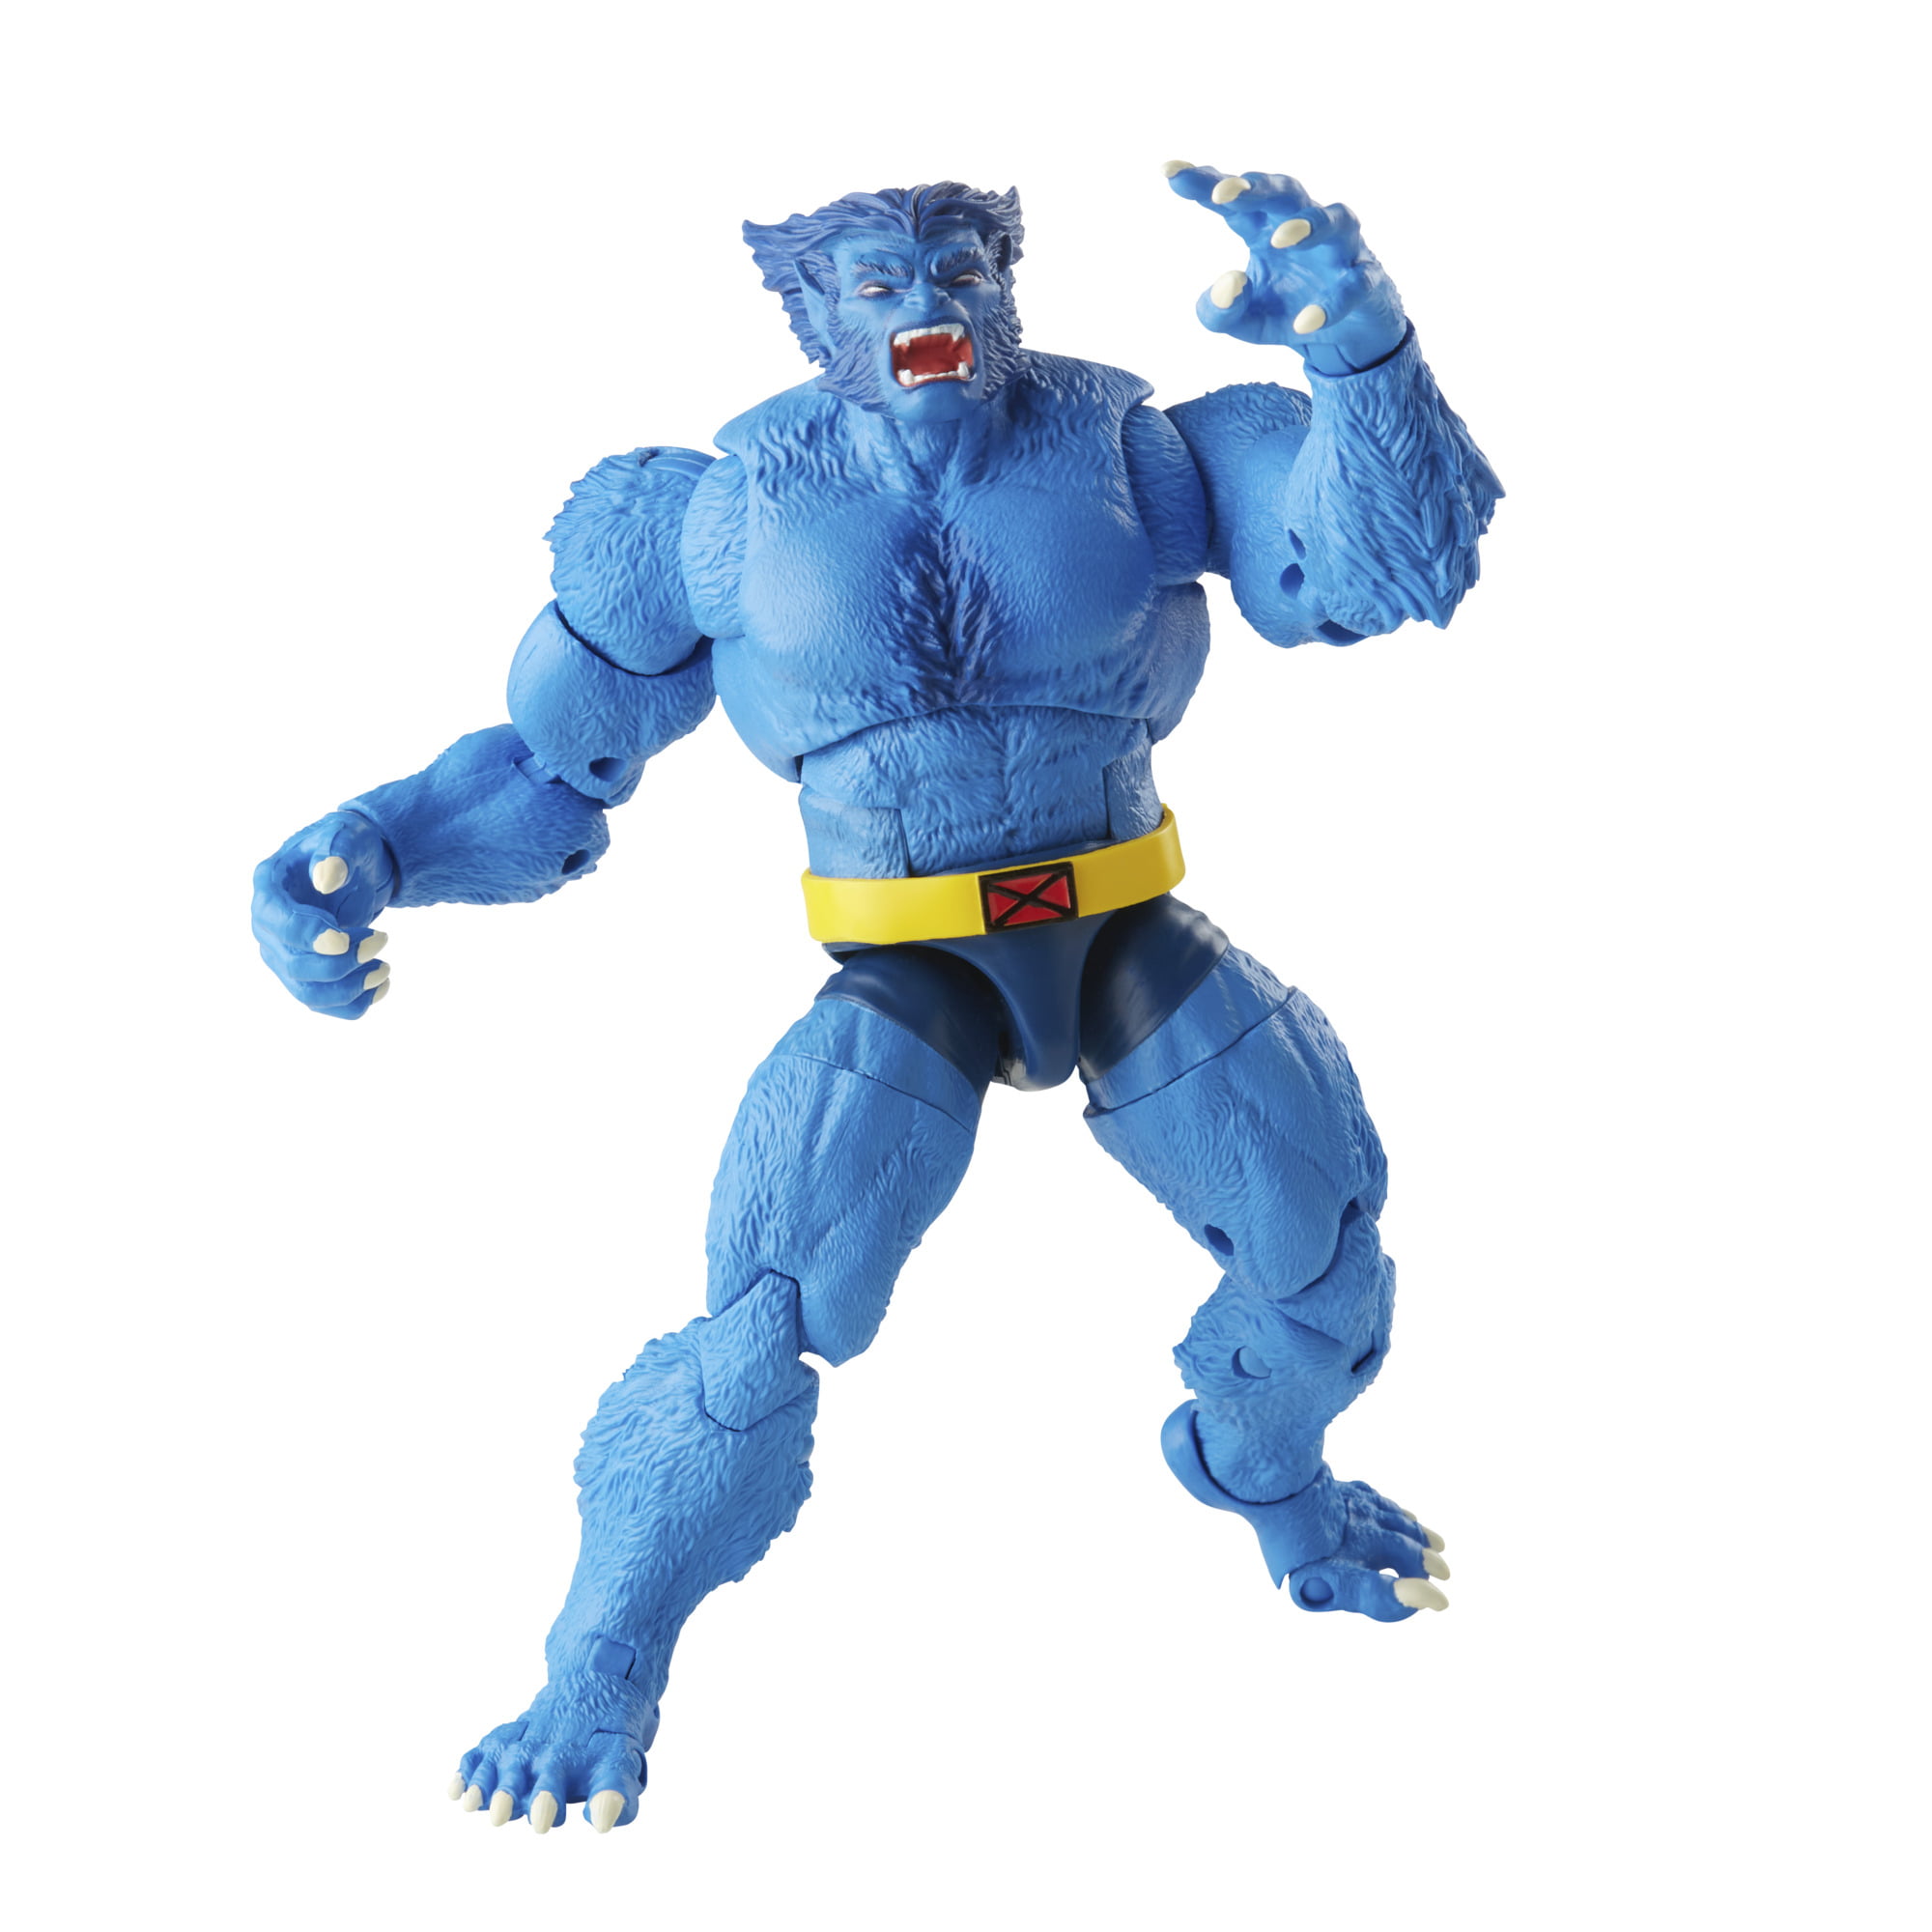 Marvel Legends Series X-Men Beast 6-inch Action Figure Toy, 5 Accessories  by Hasbro